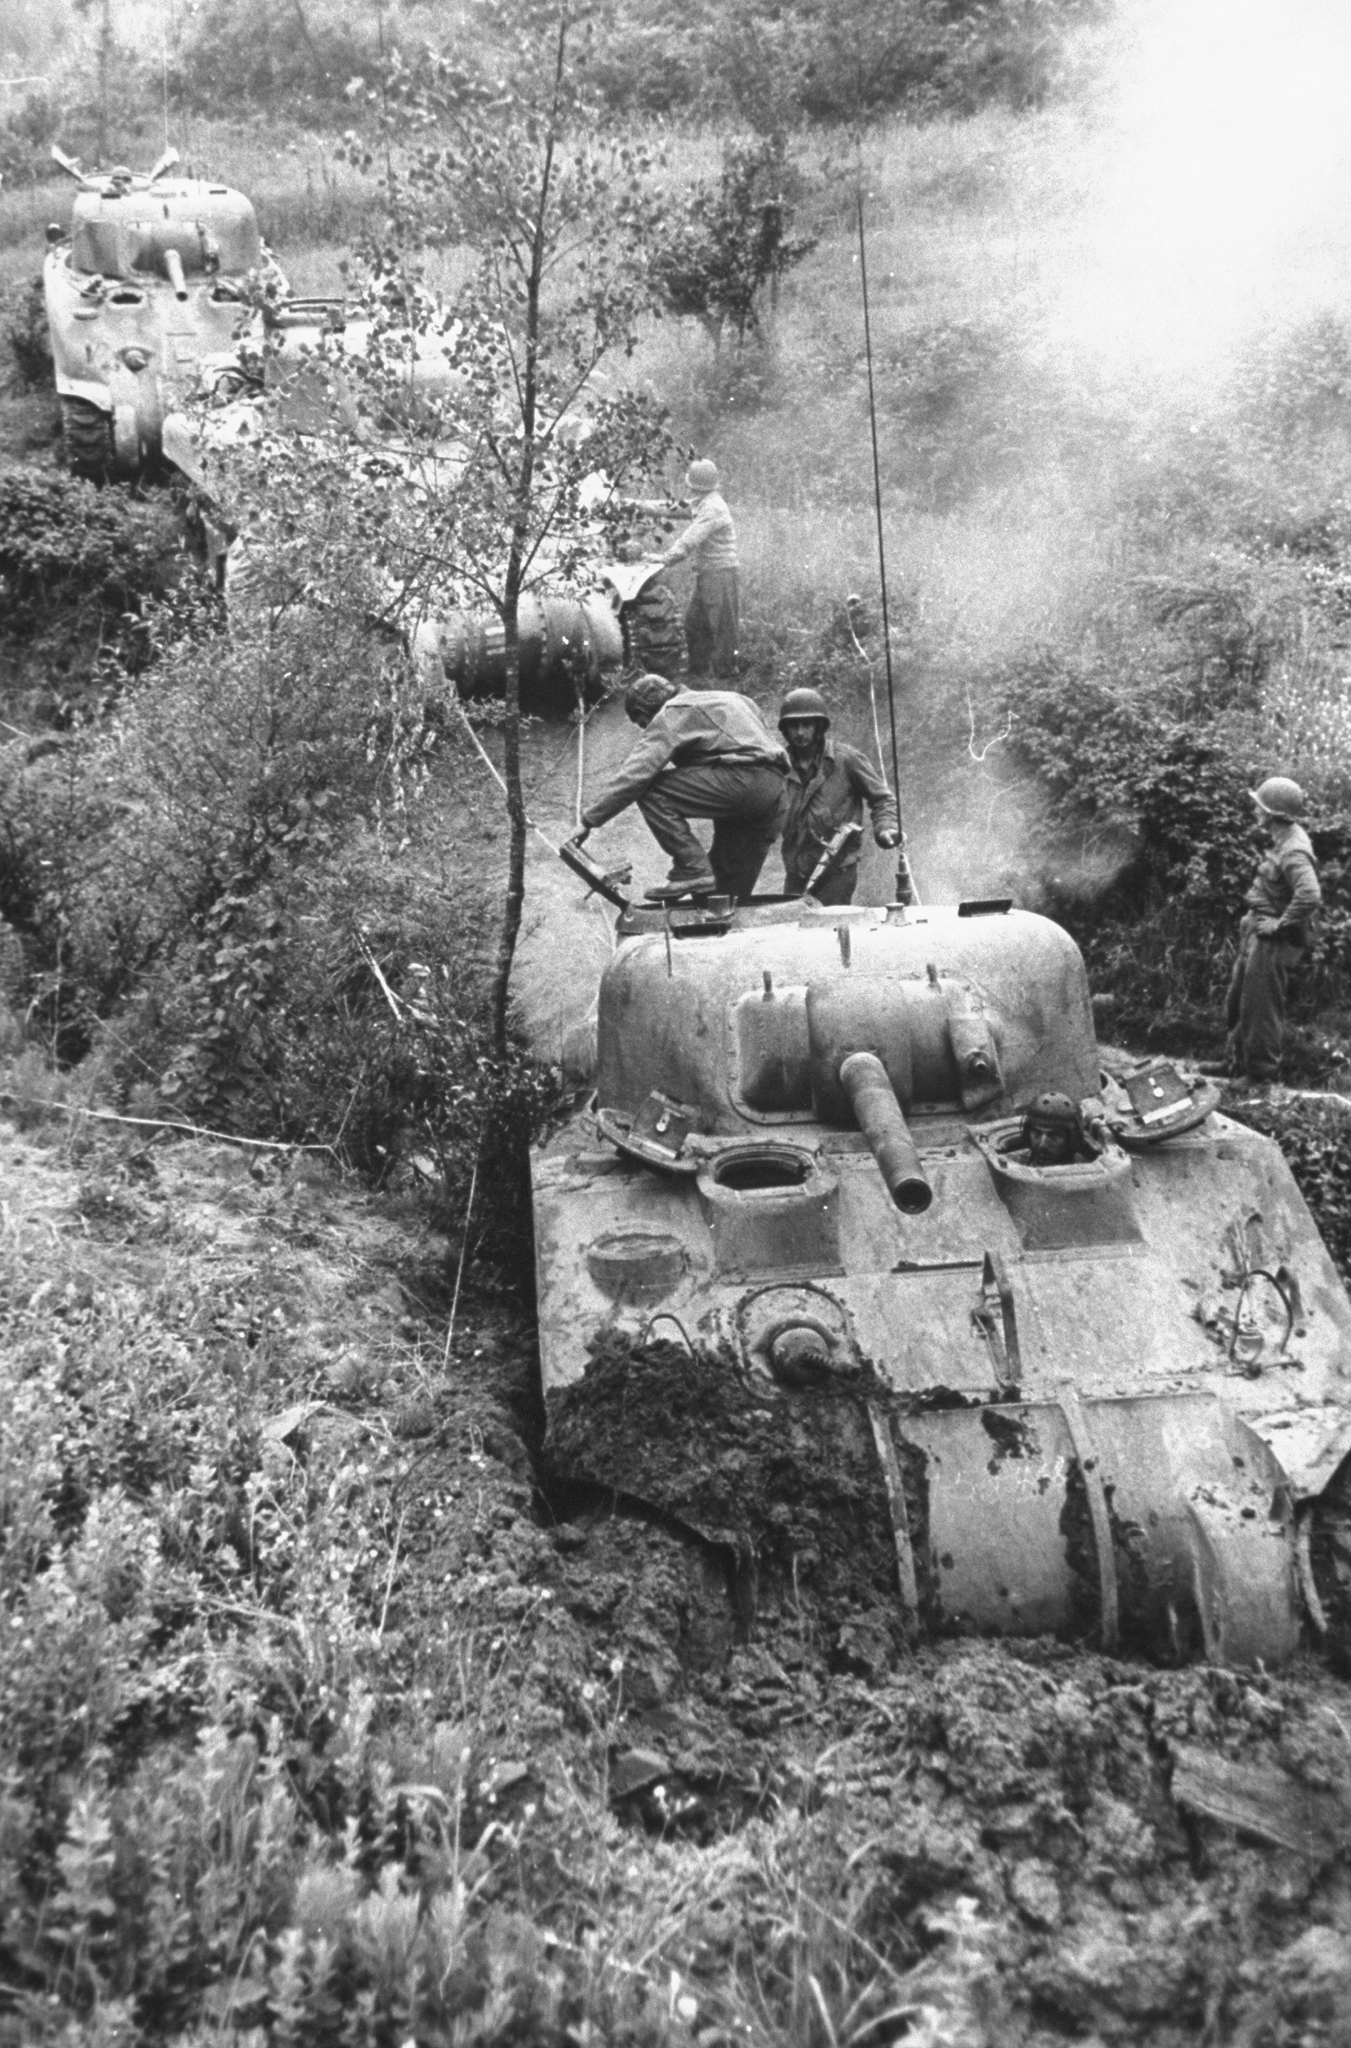 Column of American M4 Sherman tanks bogged down in the mud near Minturno during the campaign to drive German forces from Italy, 1944.